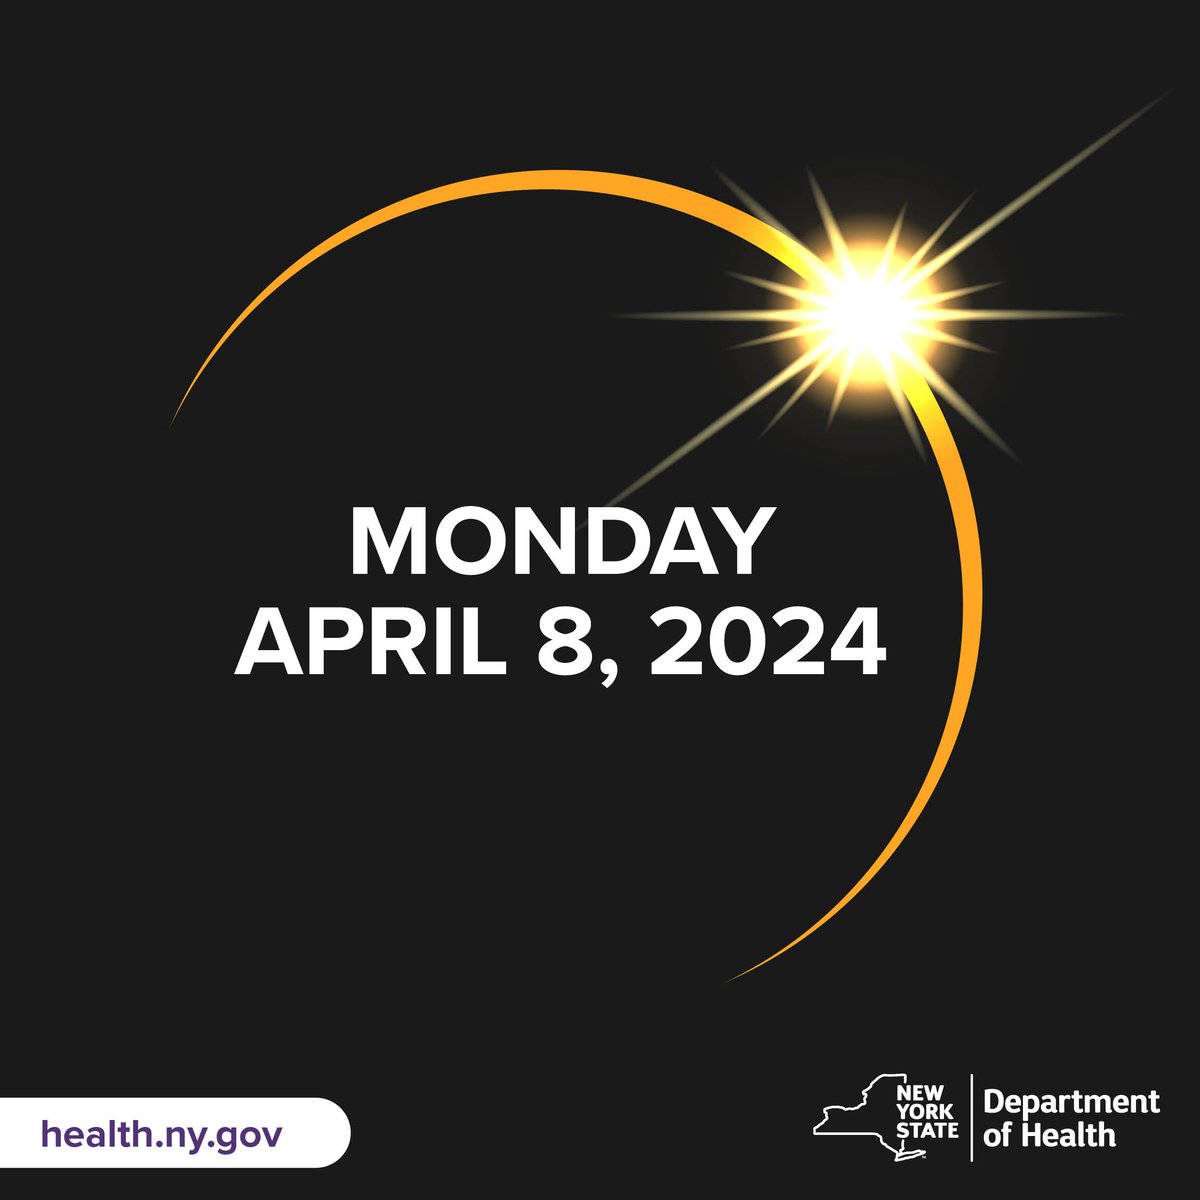 Being healthy means being safe while enjoying this spectacular event. Make sure you dress for the weather, give yourself plenty of time if you are heading out, and double check you have the critically important solar viewing glasses.